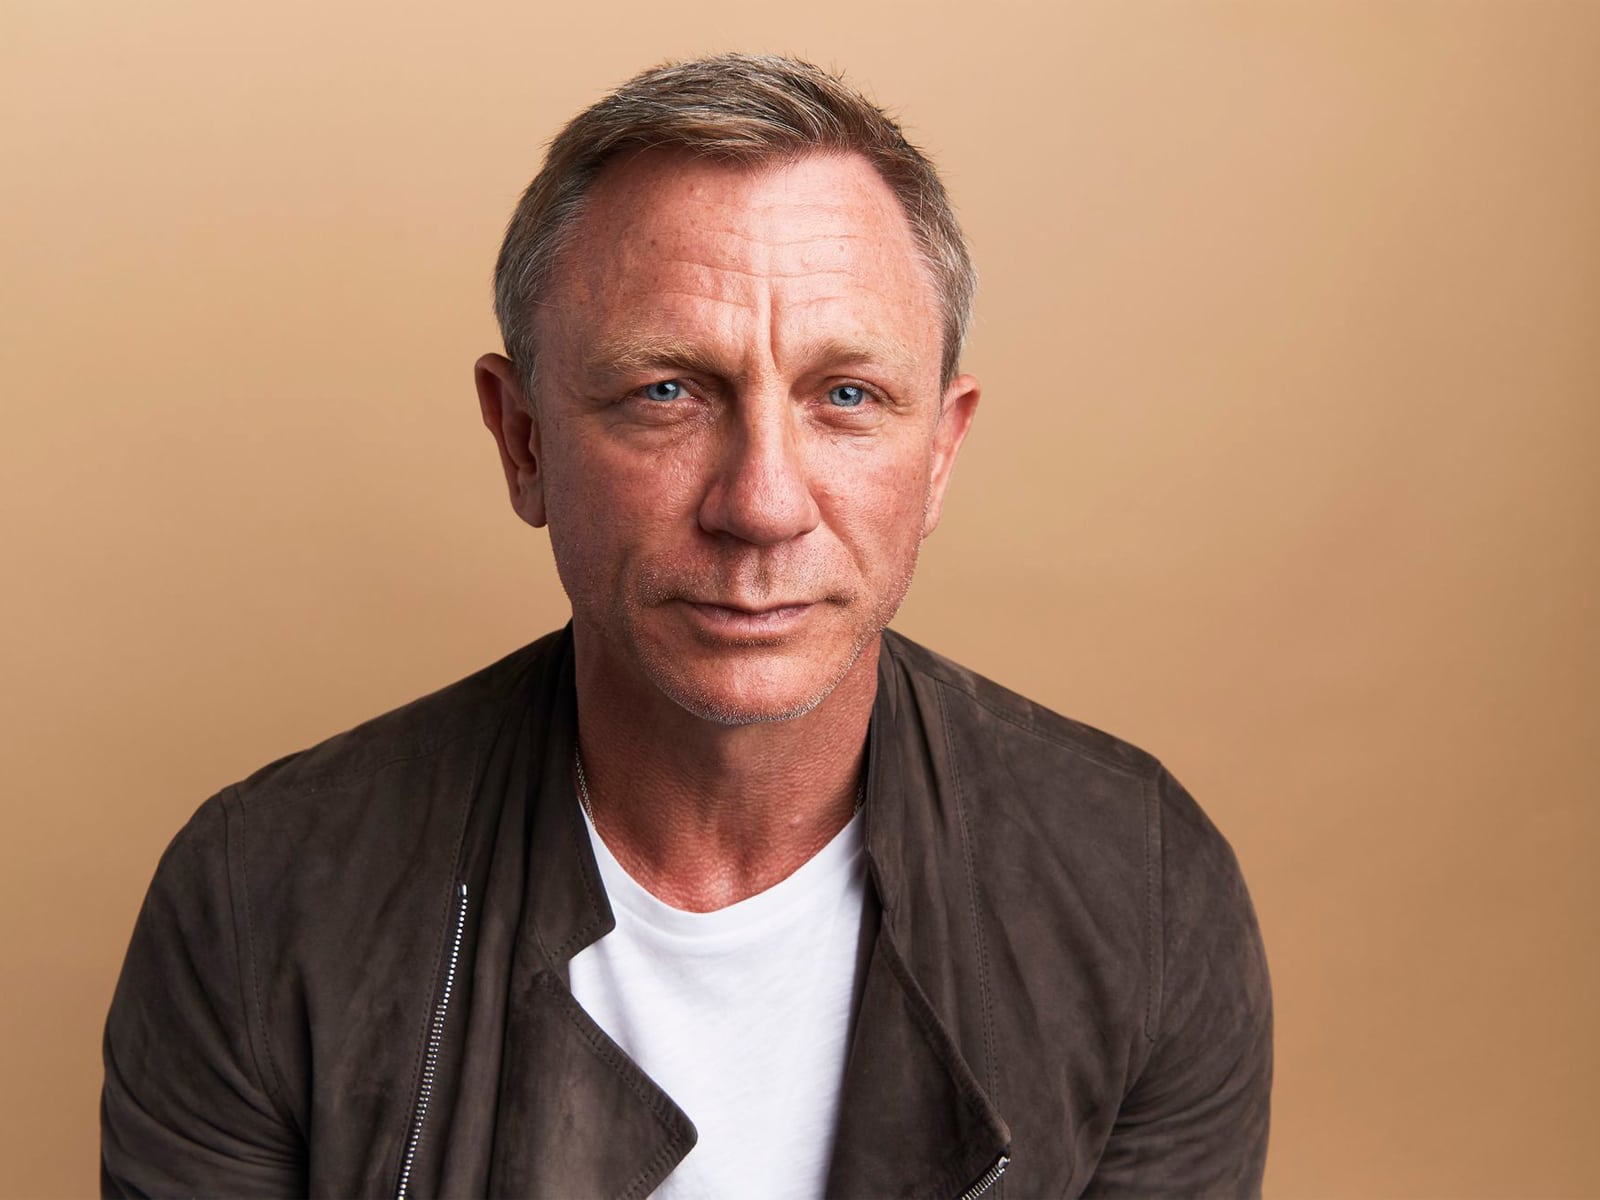 Highlights from BAFTA's 'A Life in Pictures: Daniel Craig'